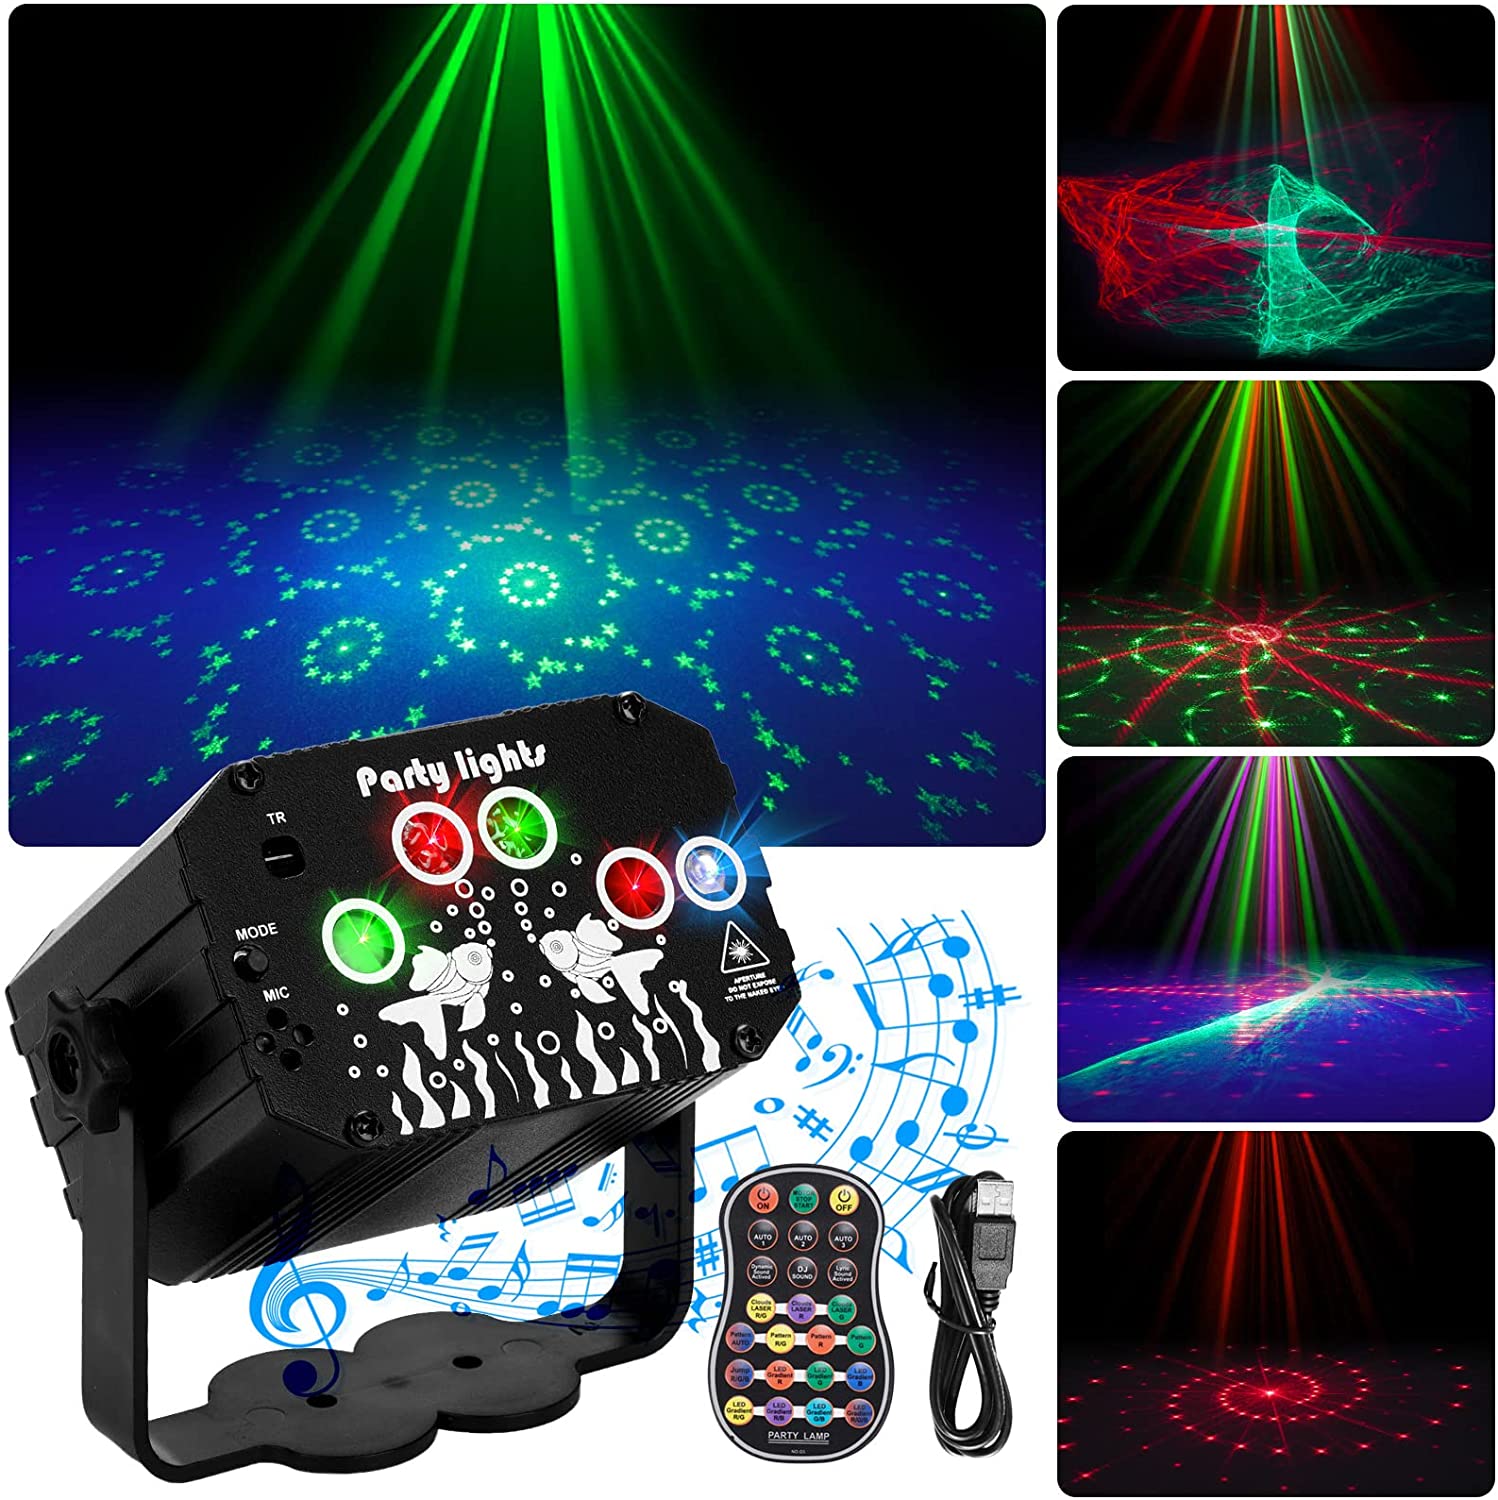 LED Laser Party Lights RG Aurora Effect Strobe with Remote LE5RGB